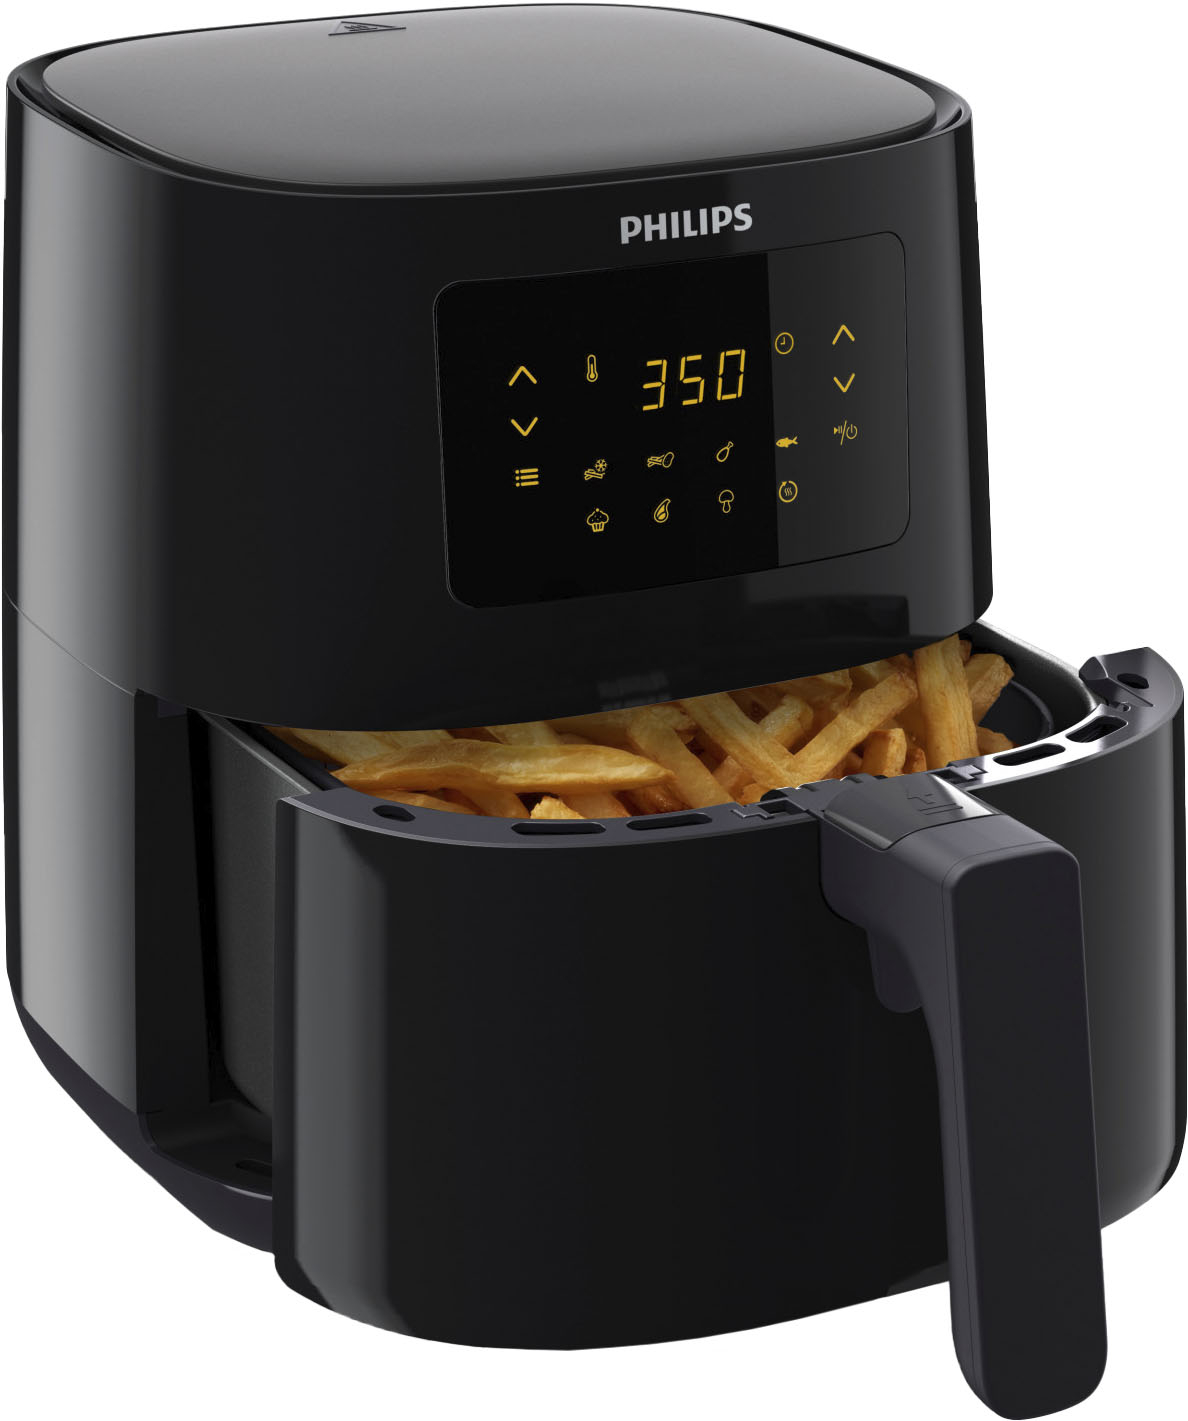 Philips Essential Airfryer-Compact Digital with Rapid Air Technology  (1.8lb/4.1L capacity)- HD9252/91 Black HD9252/91 - Best Buy